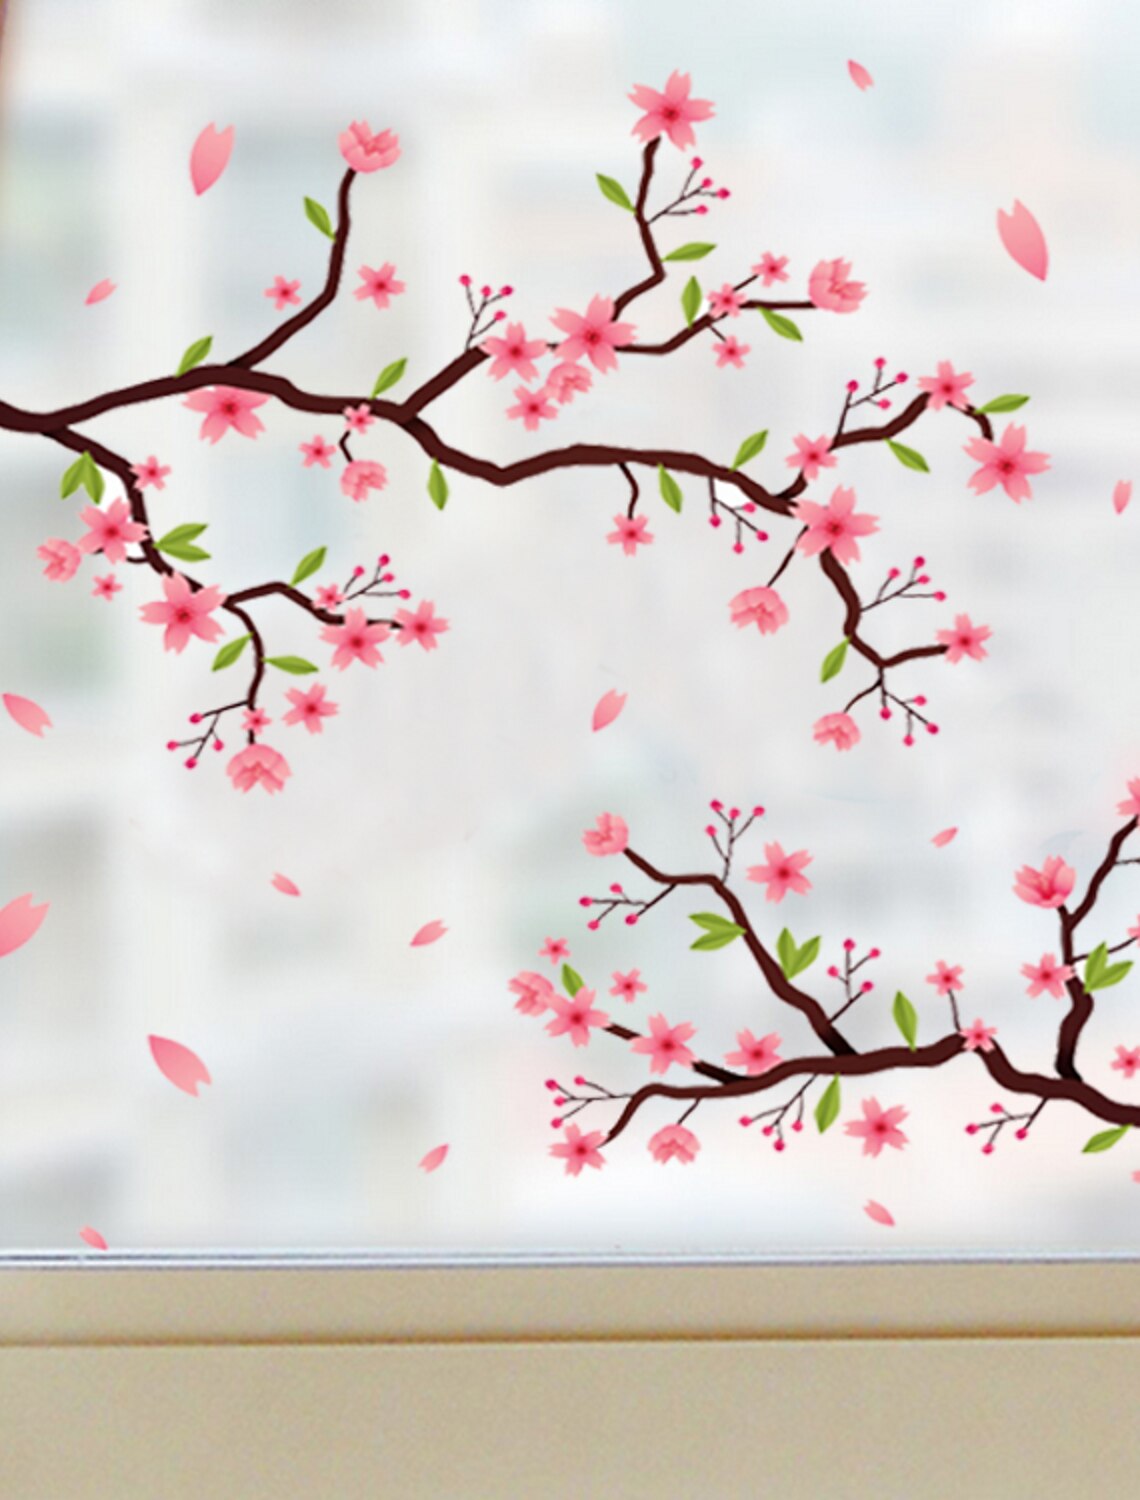 Frosted Cling Screen Translucent Window Glass Film Sticker for Bathroom Living Room 60cm x 58cm Blur Ink Painting Flower 